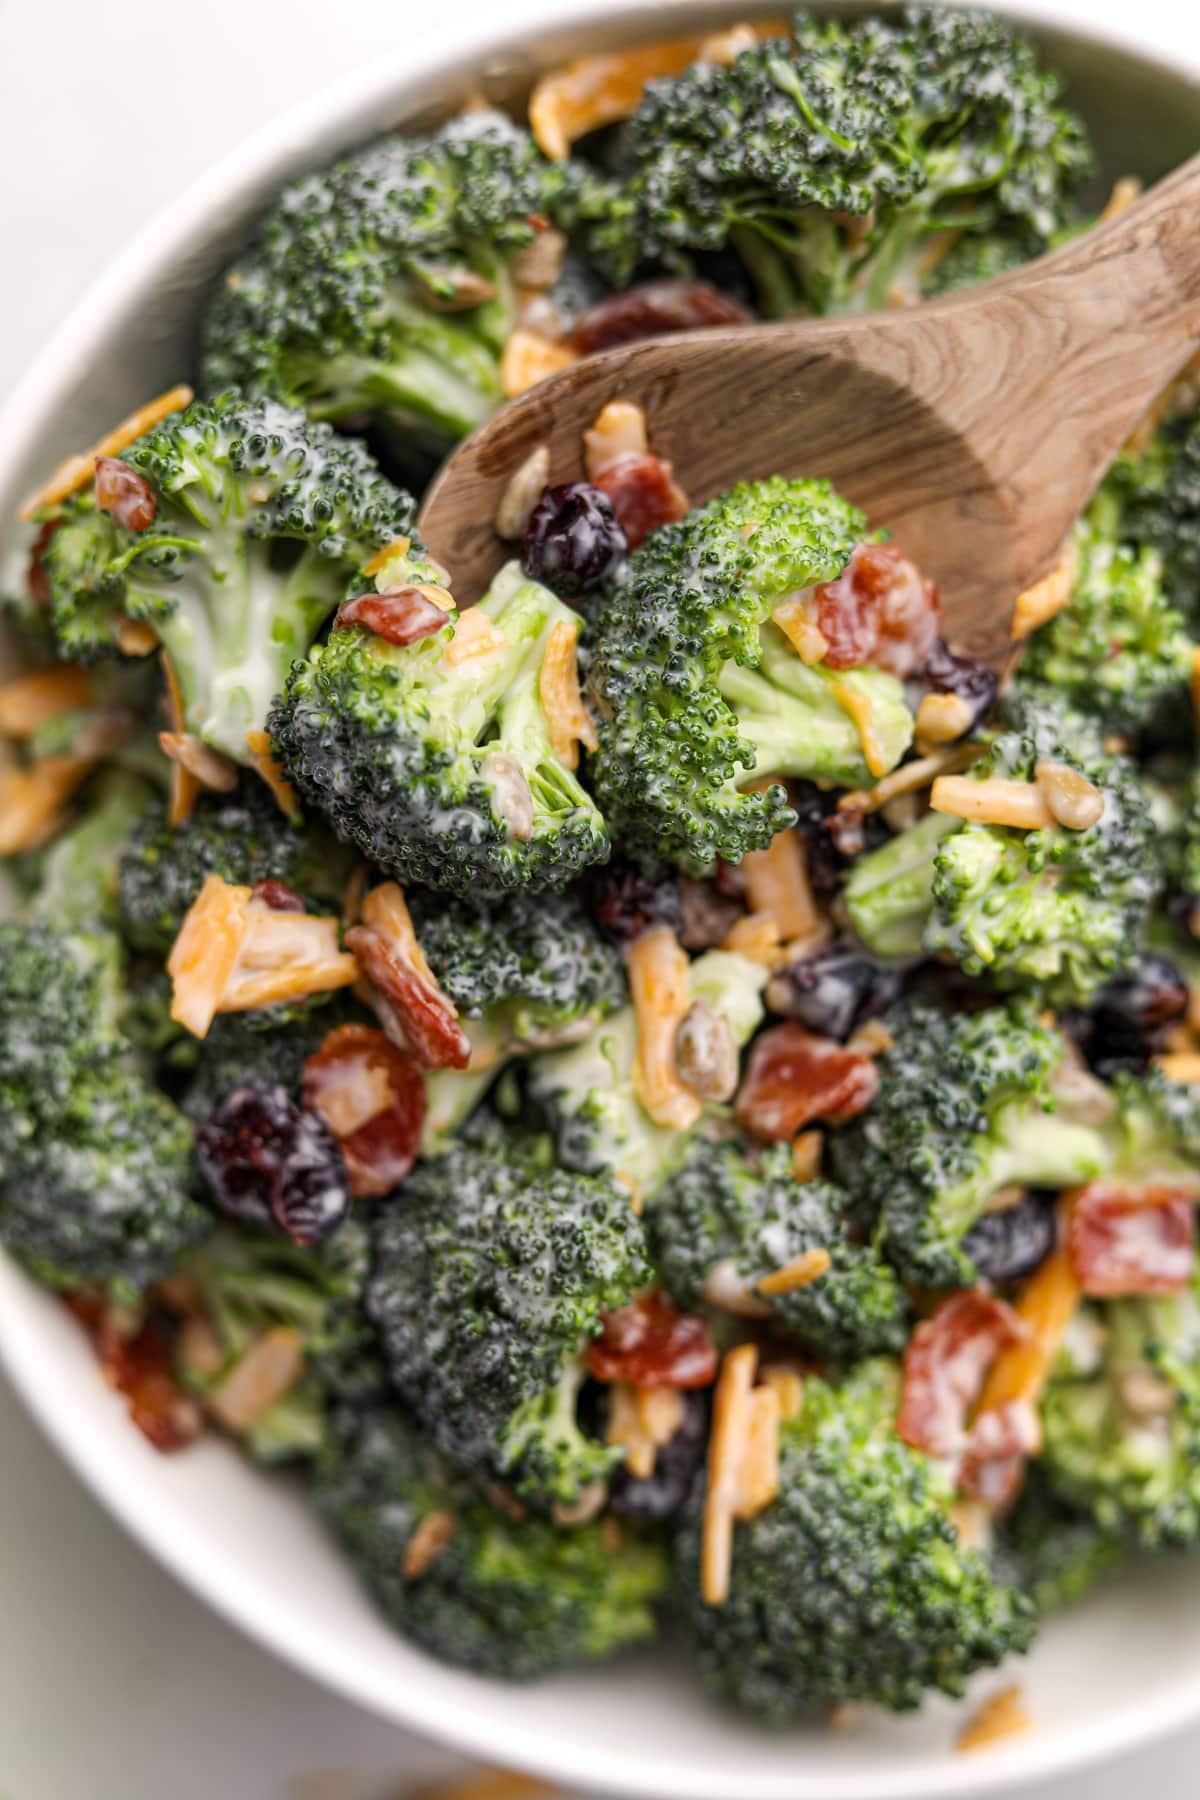 A wooden spoon taking a small portion from a large bowl of broccoli salad. It's garnished with bacon and cheddar cheese shreds.